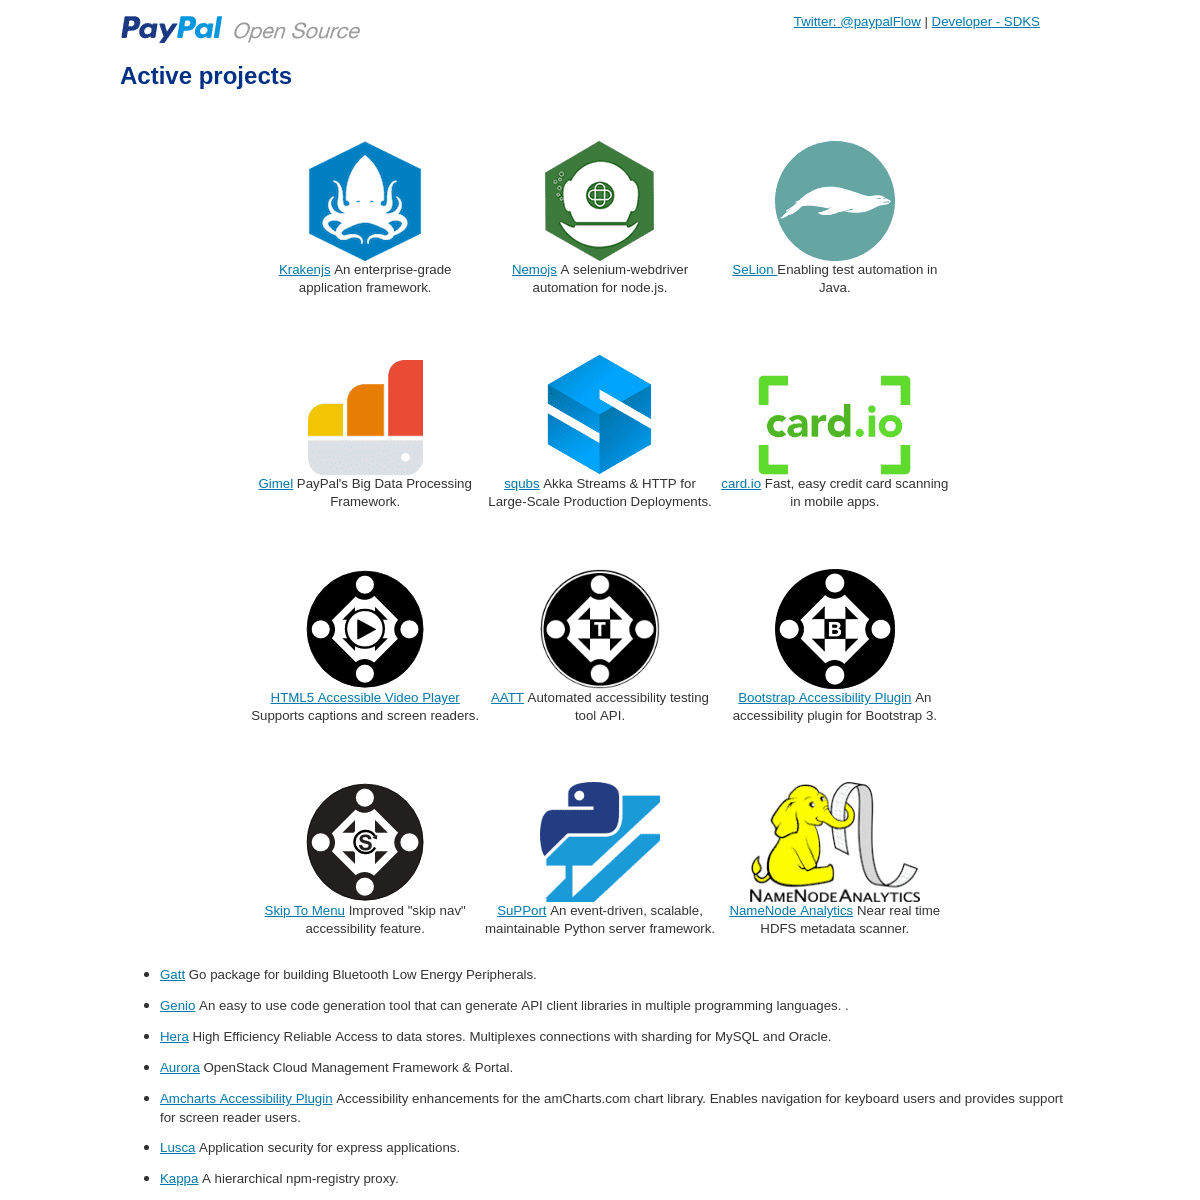 Open Source at PayPal